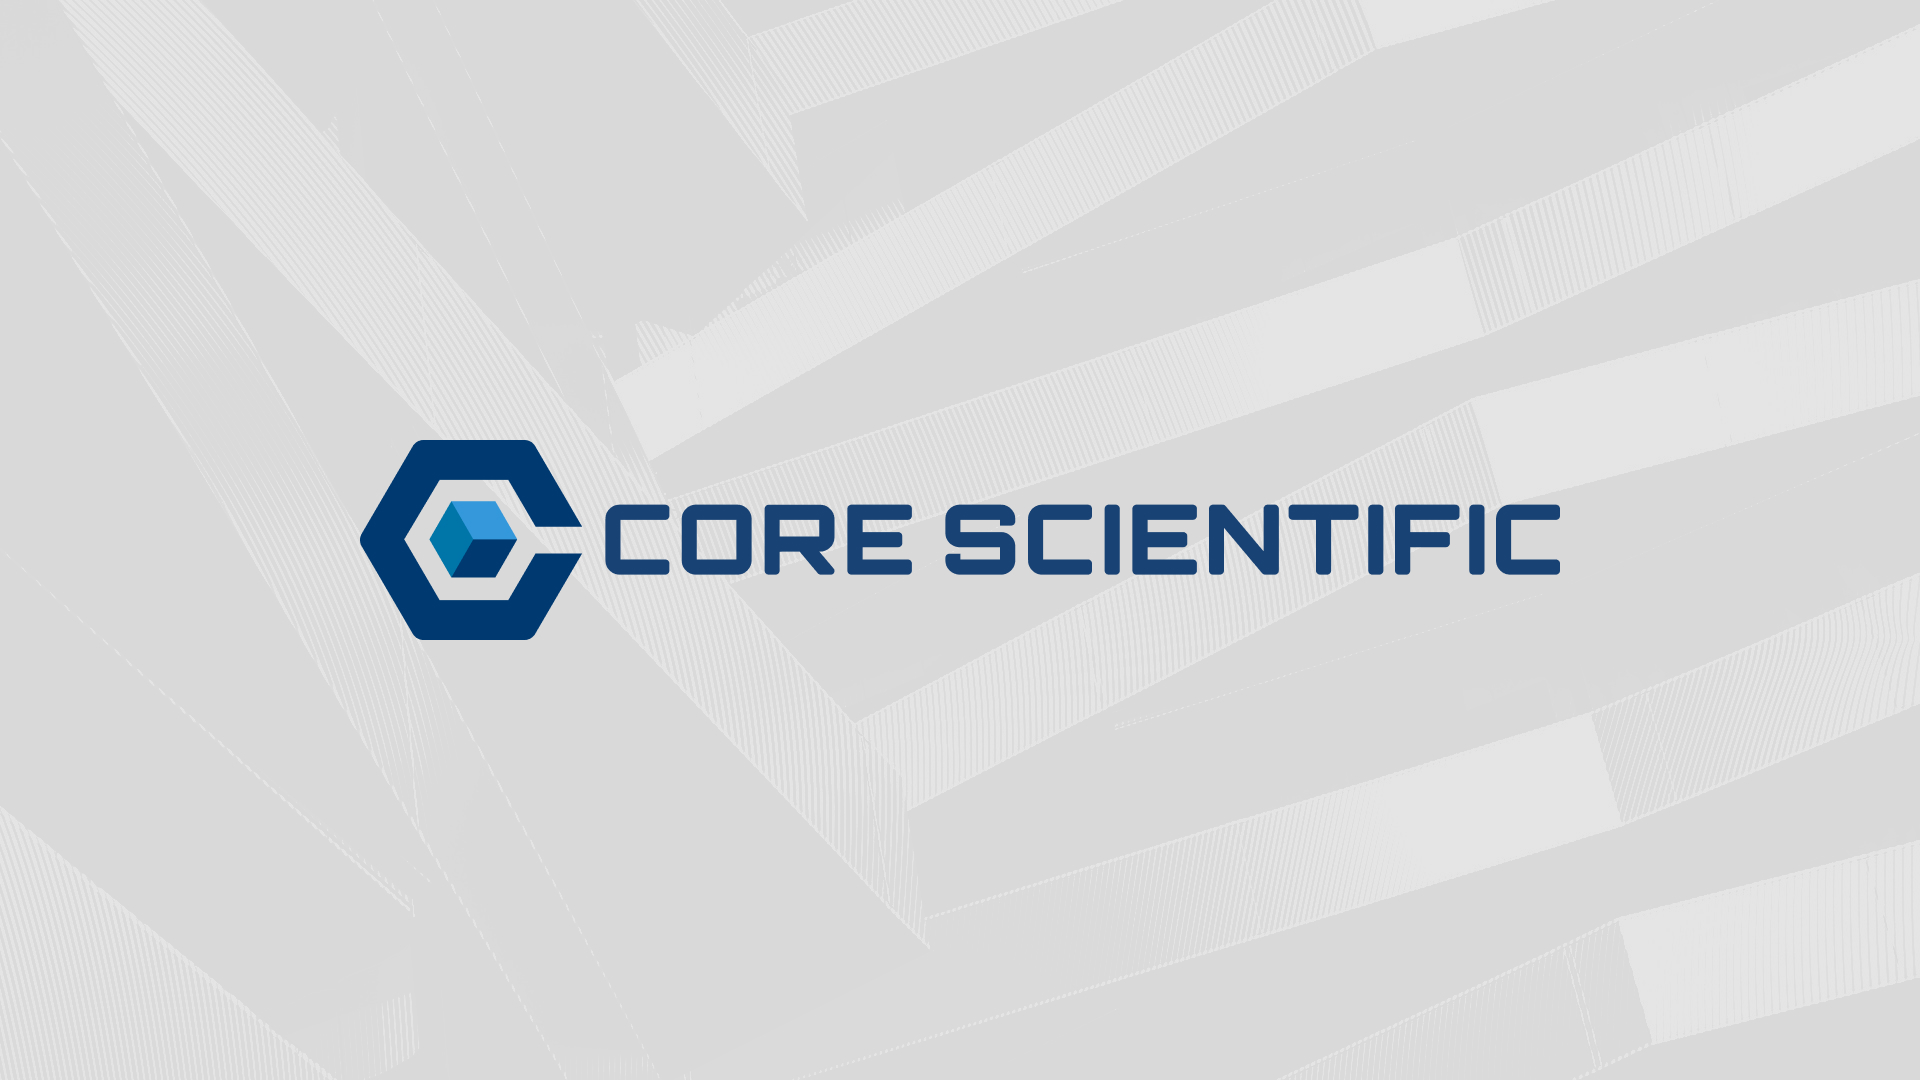 Core Scientific to Exit Bankruptcy by September